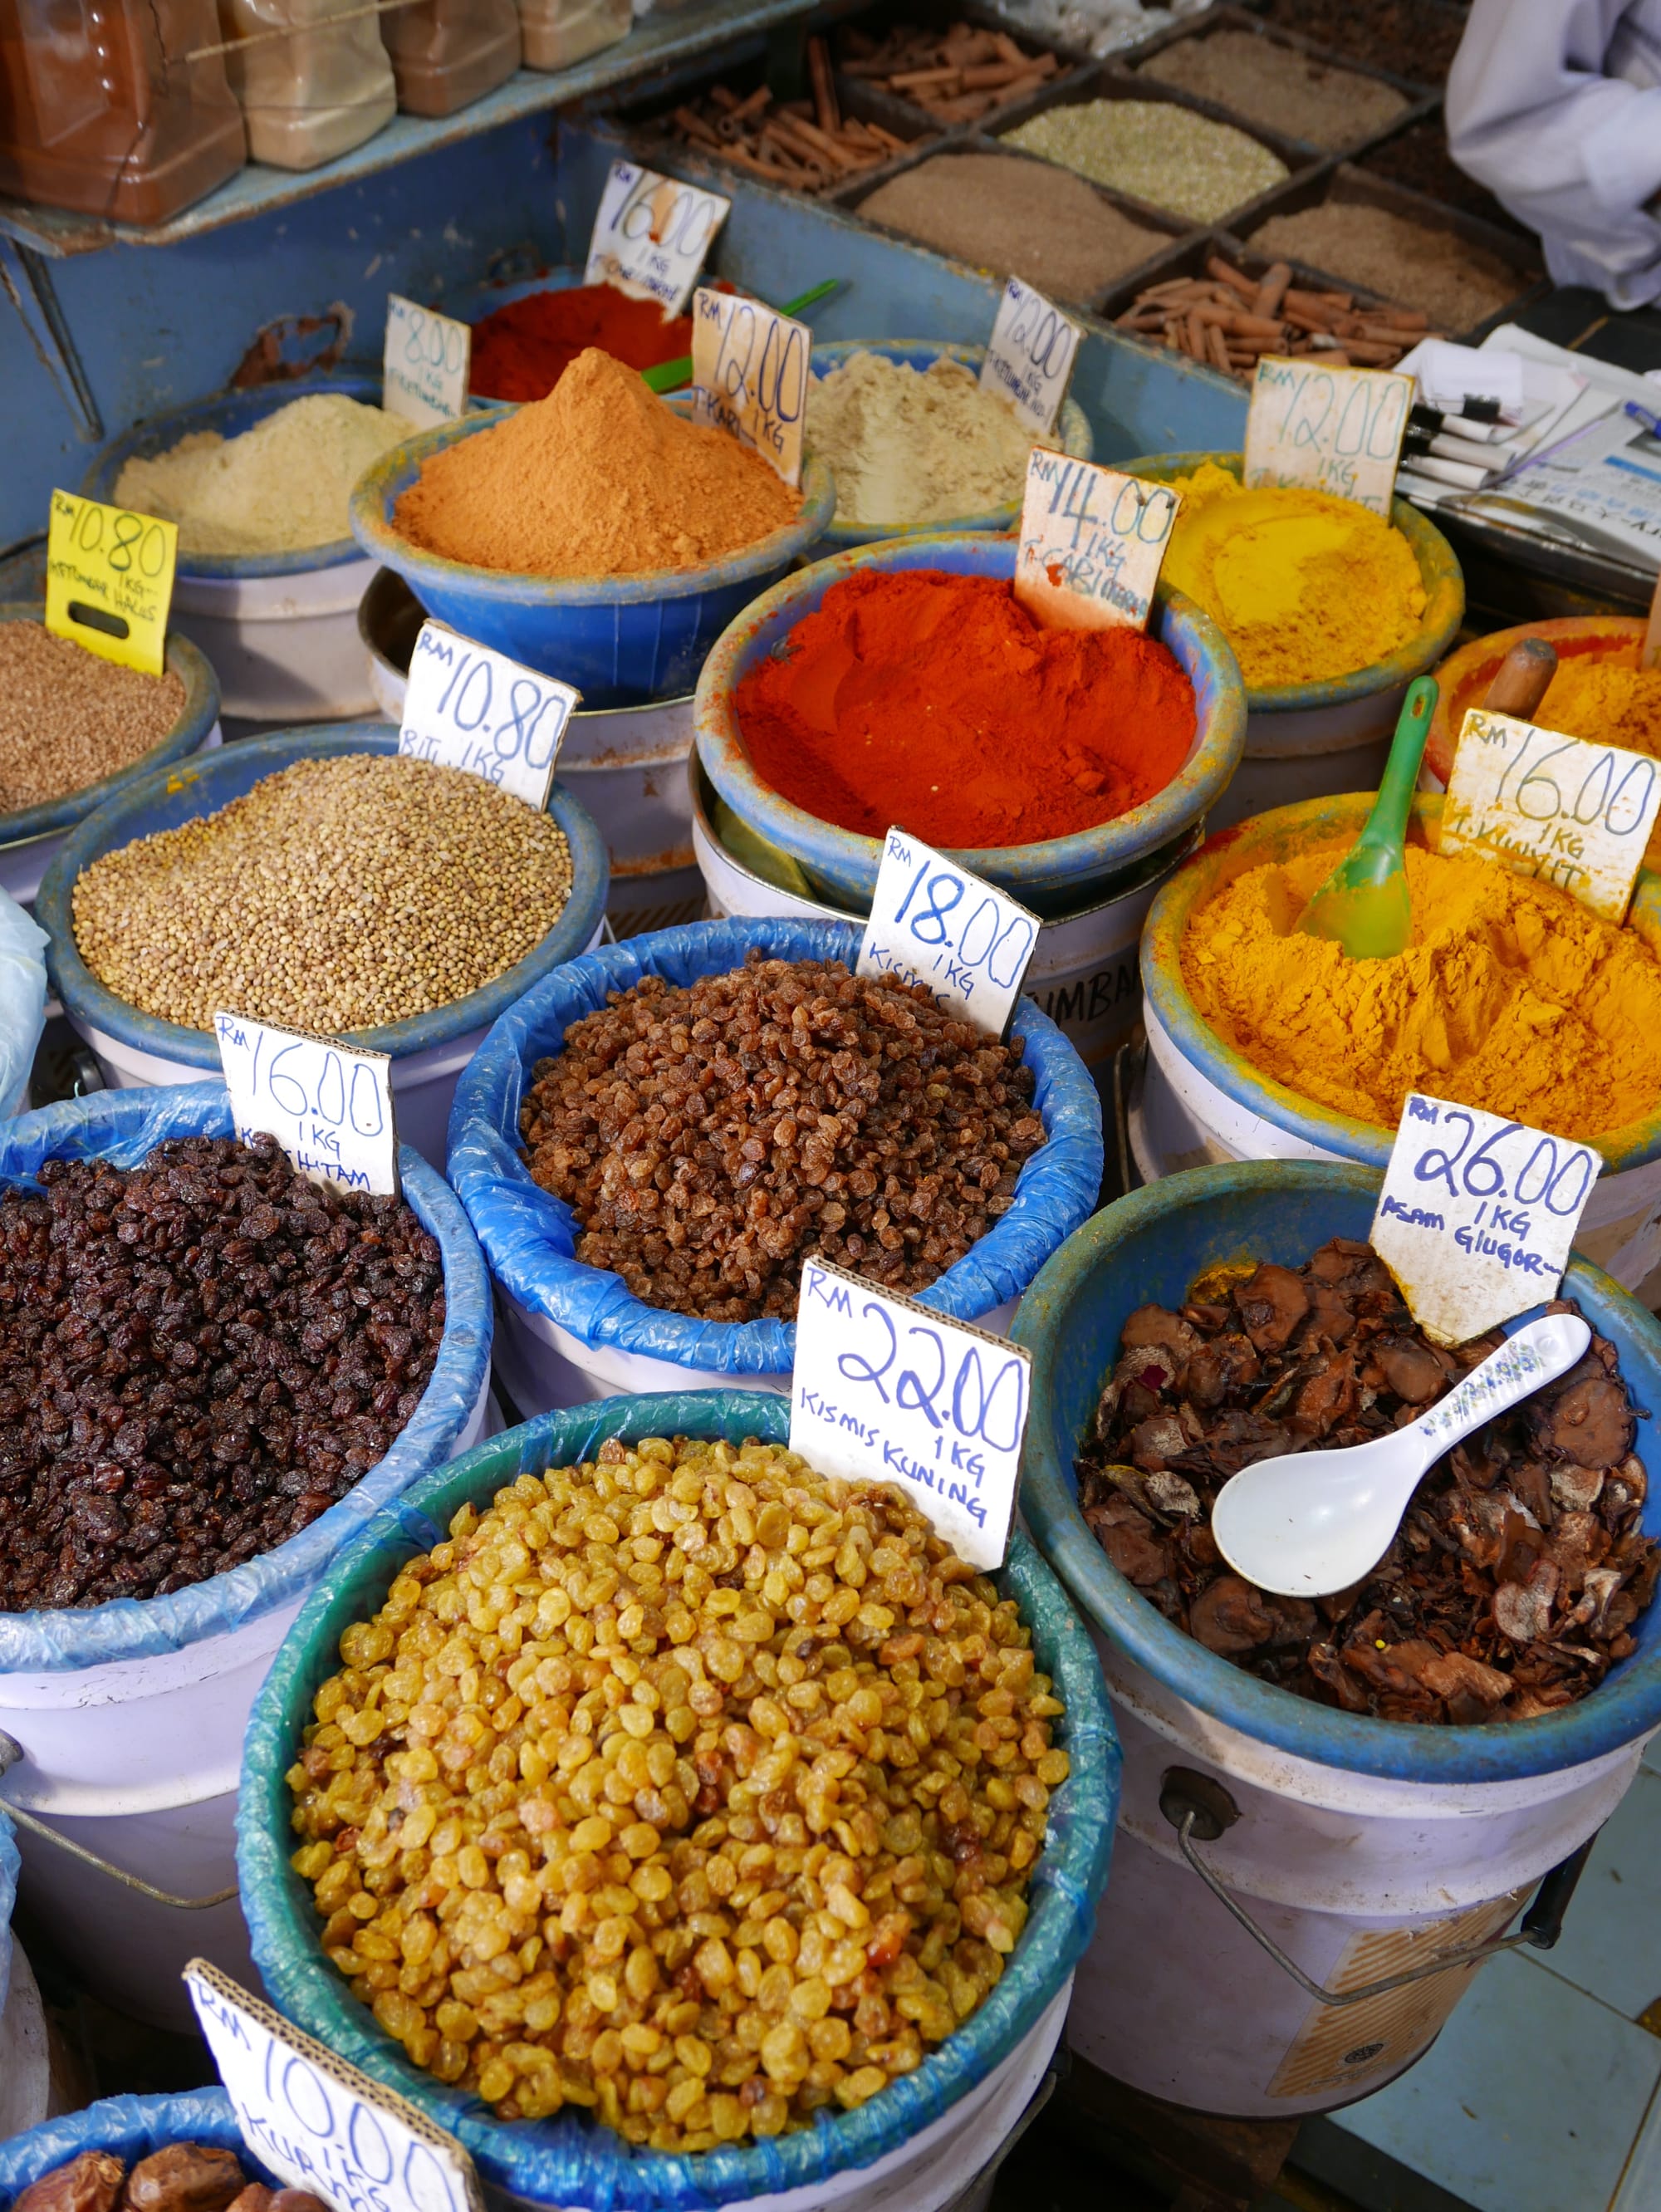 Photo by Author — dried fruit and spices — shops near India Street, Kuching, Sarawak, Malaysia